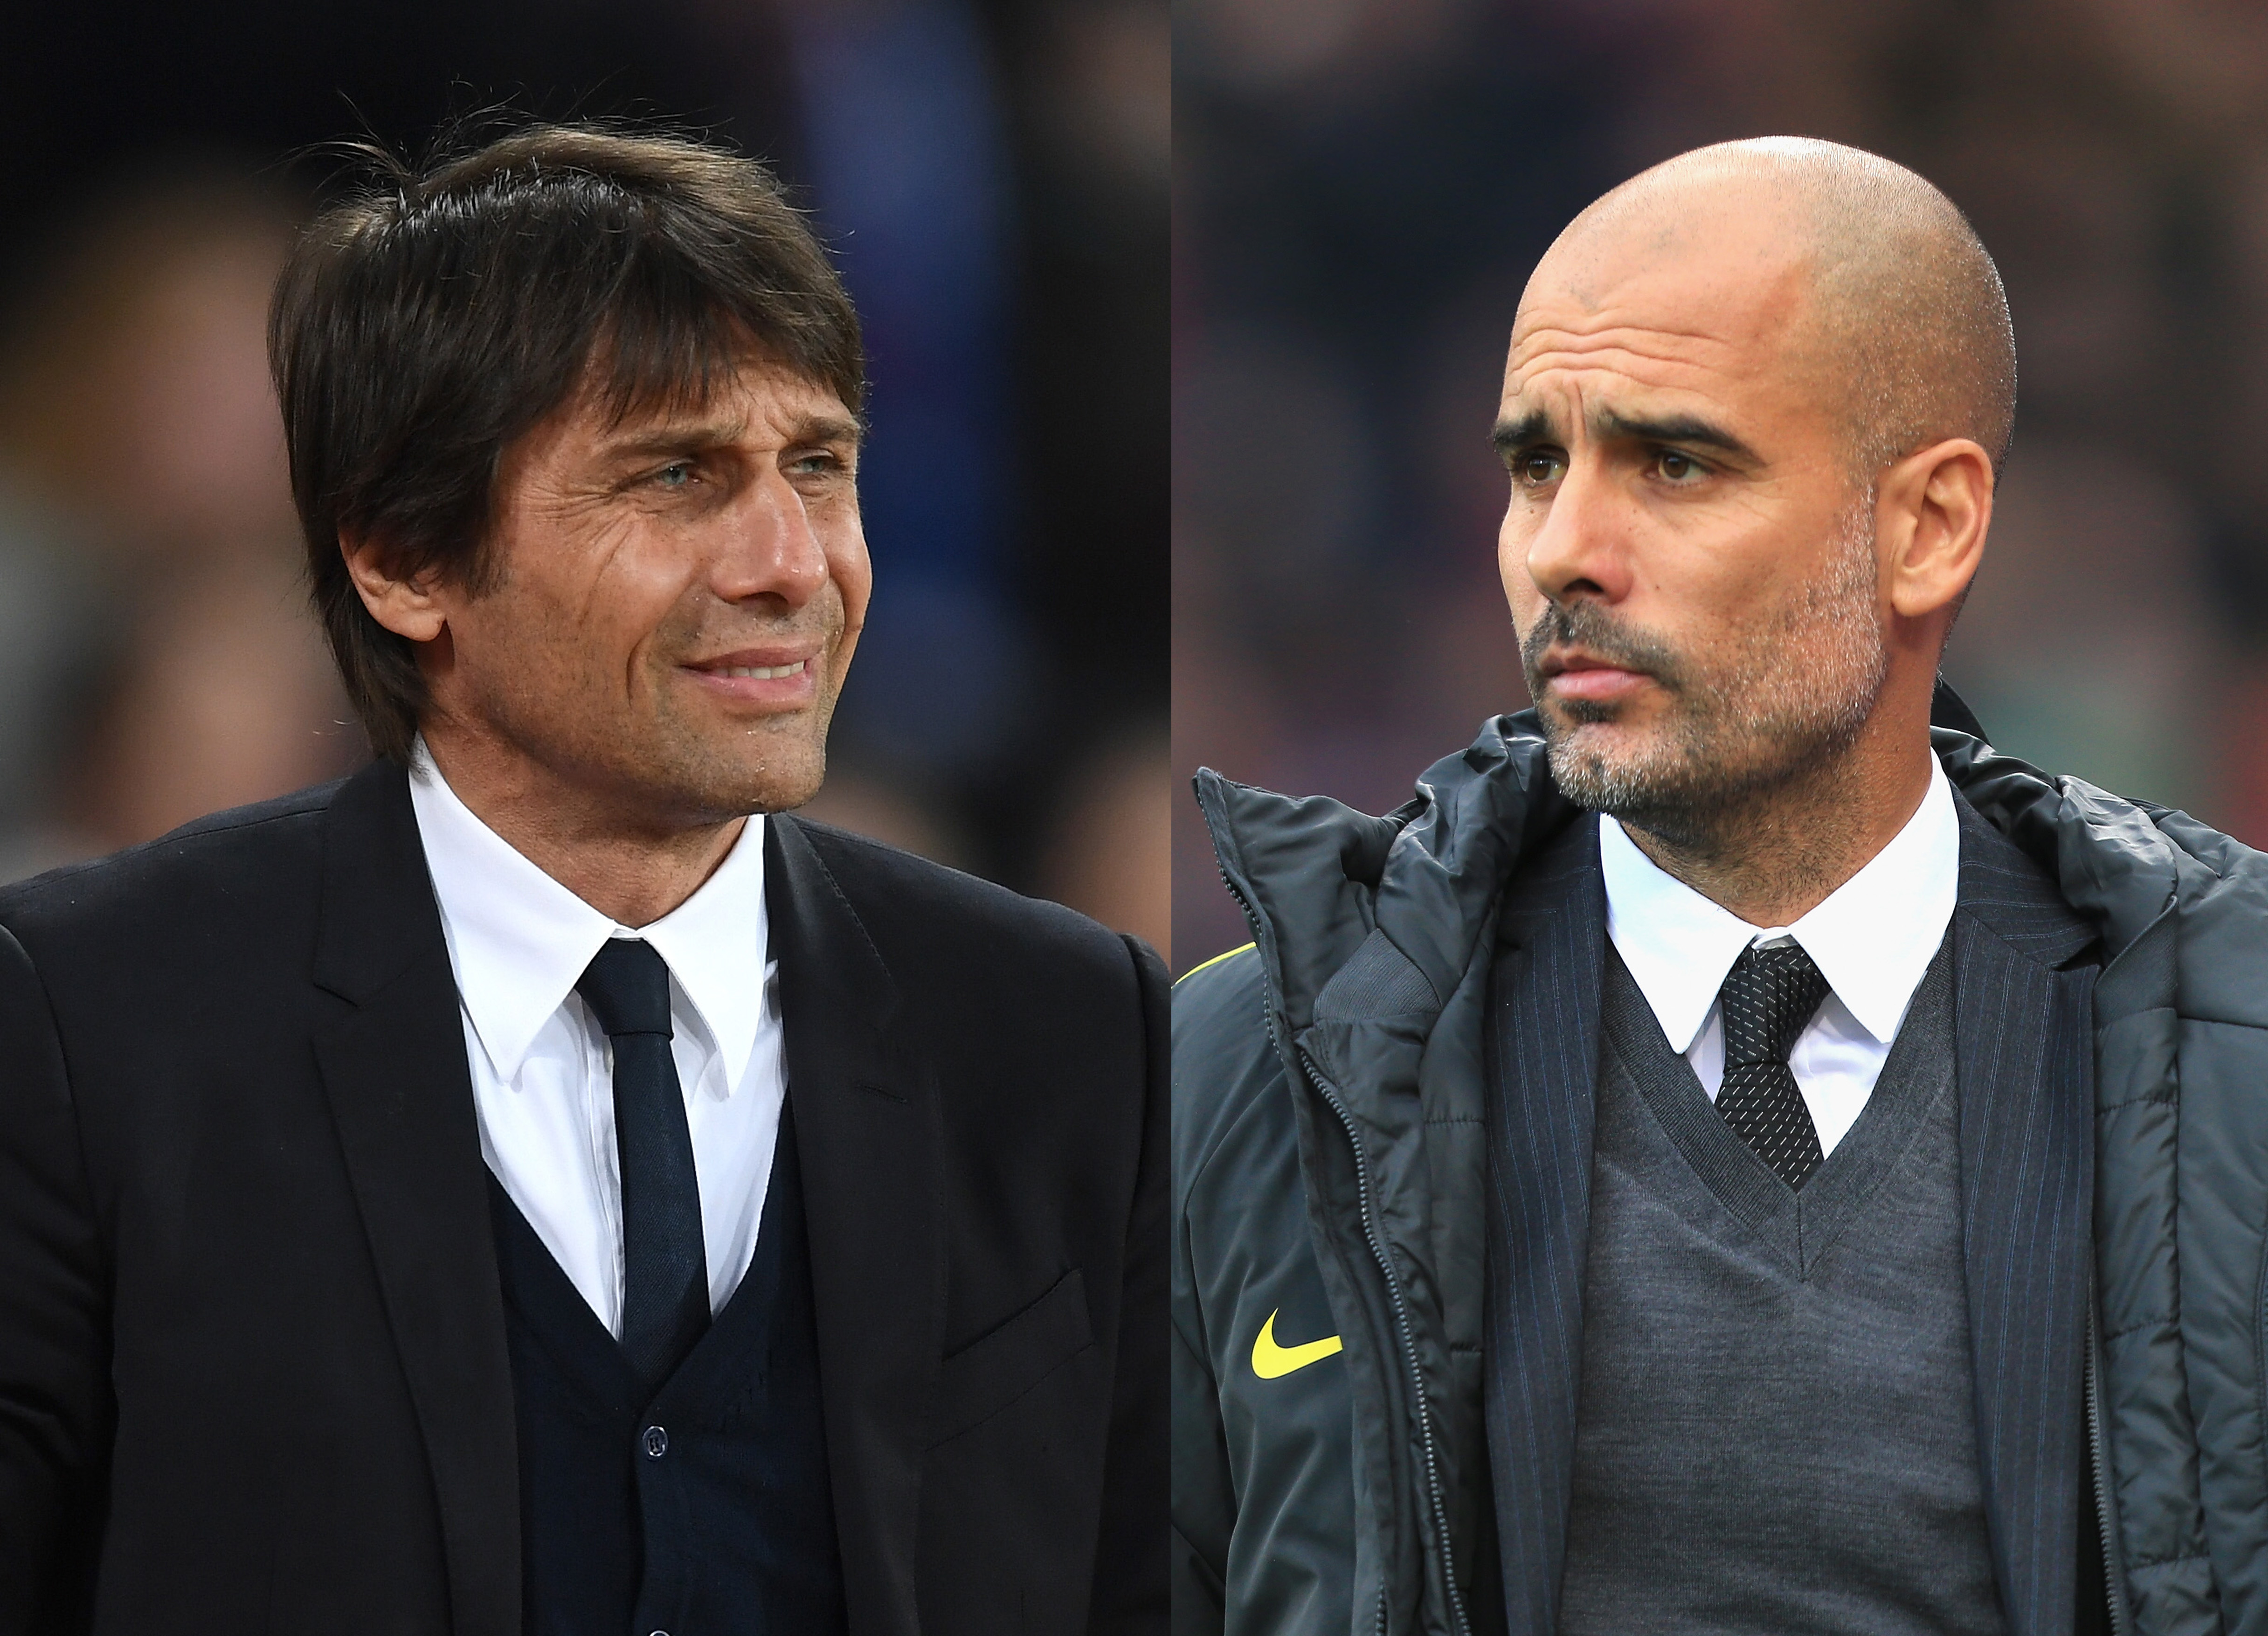 FILE PHOTO (EDITORS NOTE: COMPOSITE OF TWO IMAGES - Image numbers (L) 648790494 and 624347152) In this composite image a comparision has been made between Antonio Conte, Manager of Chelsea (L) and  Josep Guardiola, Manager of Manchester City. Chelsea and Manchester City meet ina Premier League fixture at Stamford Bridge on April 5, 2017 in London,England.  ***LEFT IMAGE*** STRATFORD, ENGLAND - MARCH 06: Antonio Conte, Manager of Chelsea looks on during the Premier League match between West Ham United and Chelsea at London Stadium on March 6, 2017 in Stratford, England. (Photo by Michael Regan/Getty Images) ***RIGHT IMAGE***  LONDON, ENGLAND - NOVEMBER 19: Josep Guardiola, Manager of Manchester City looks on during the Premier League match between Crystal Palace and Manchester City at Selhurst Park on November 19, 2016 in London, England. (Photo by Stephen Pond/Getty Images)